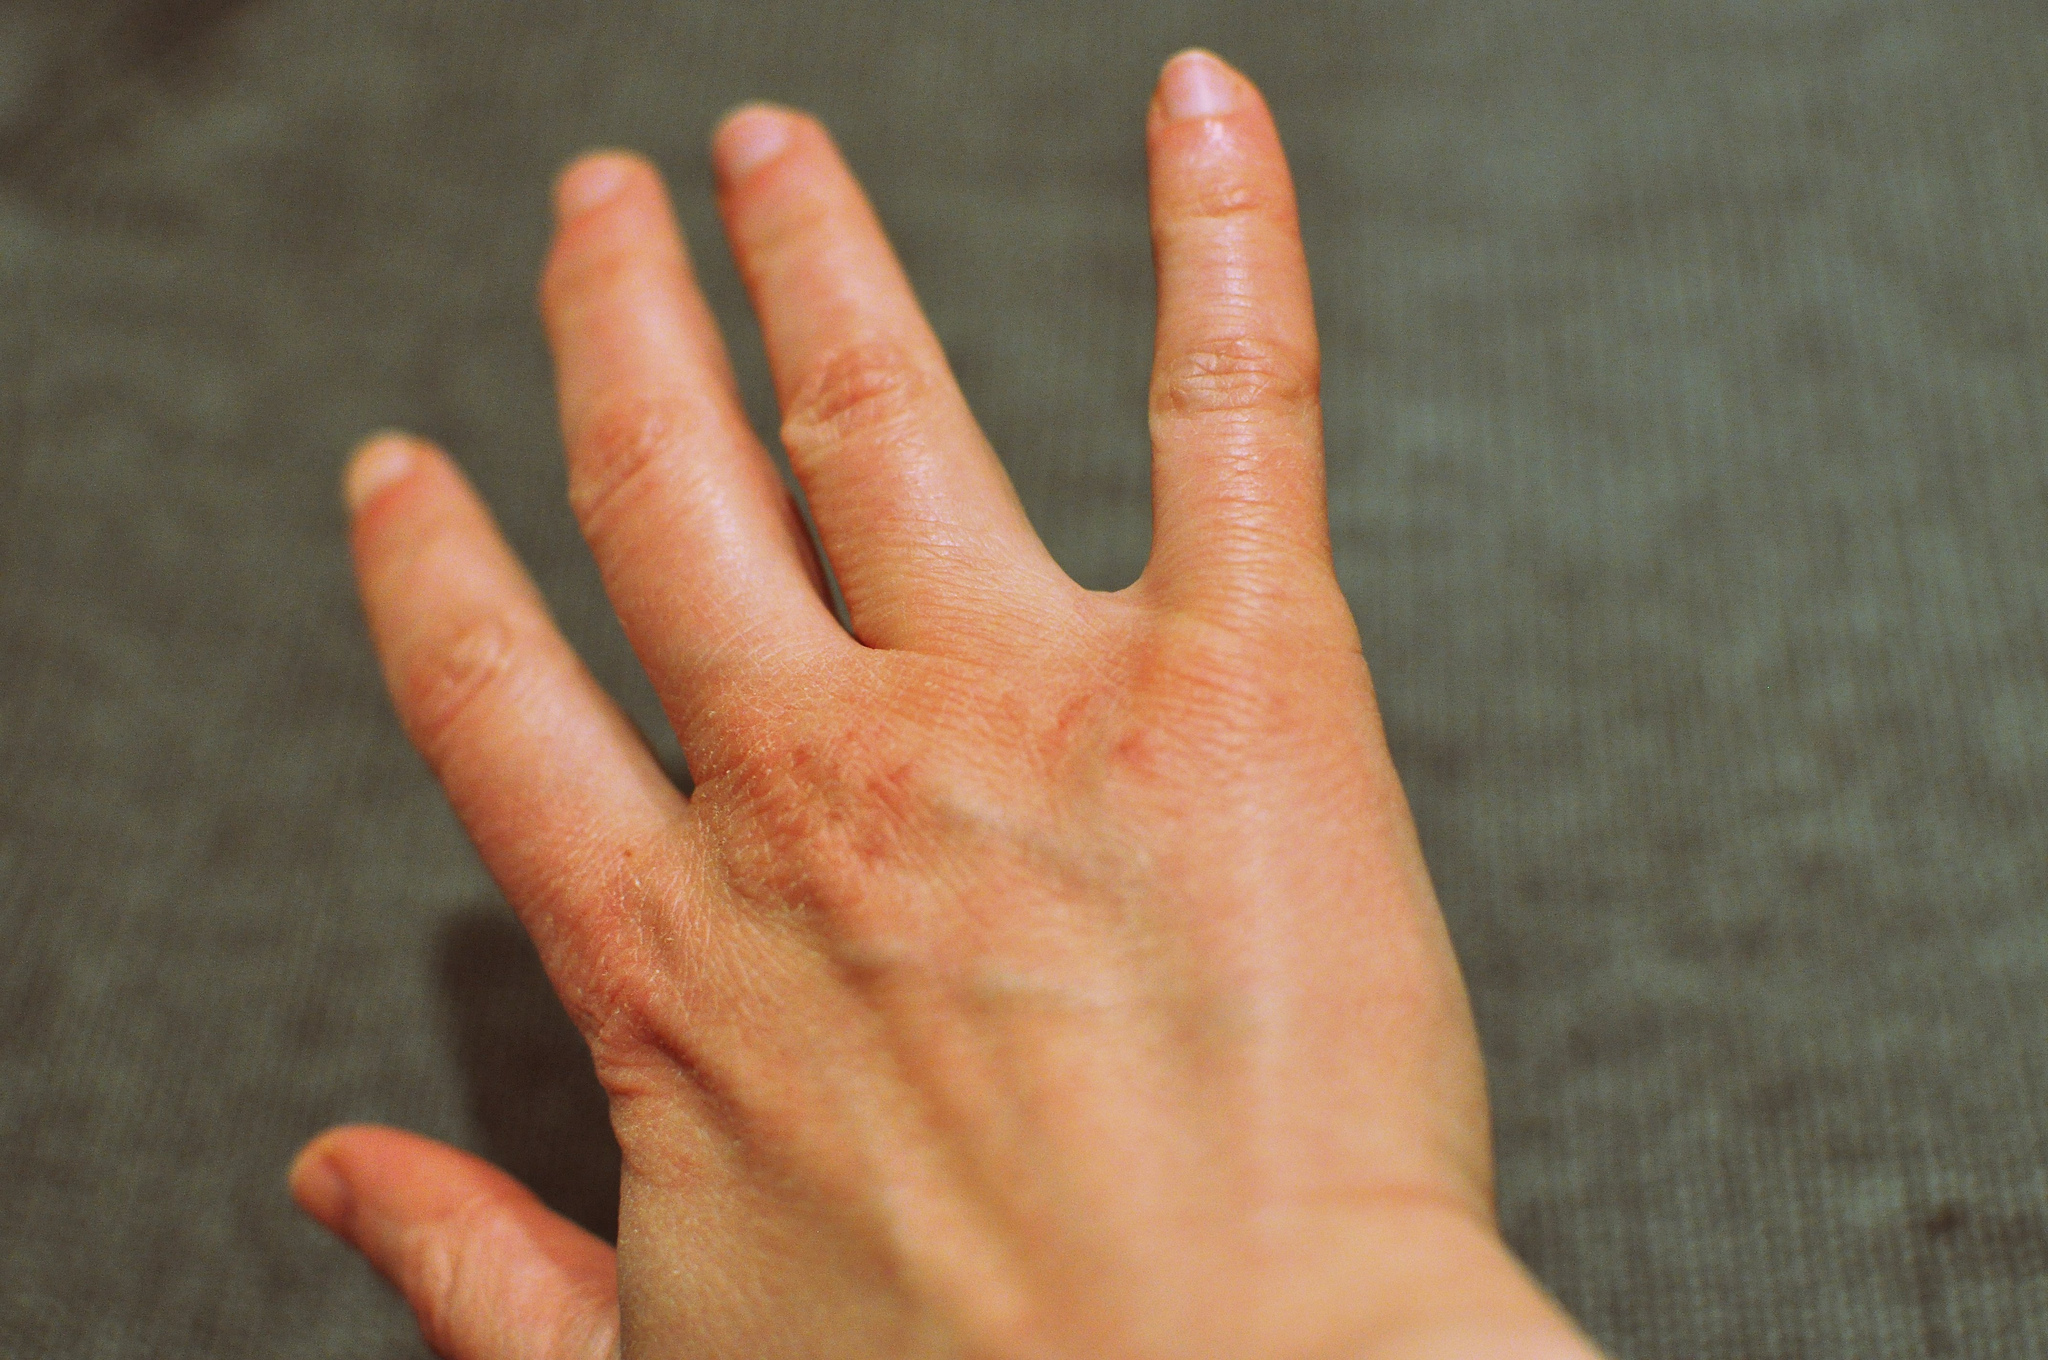 Stay on top of your diabetes skin care, and you won't end up with desiccated hands like this one ... photo by CC user  vialbost on Flickr